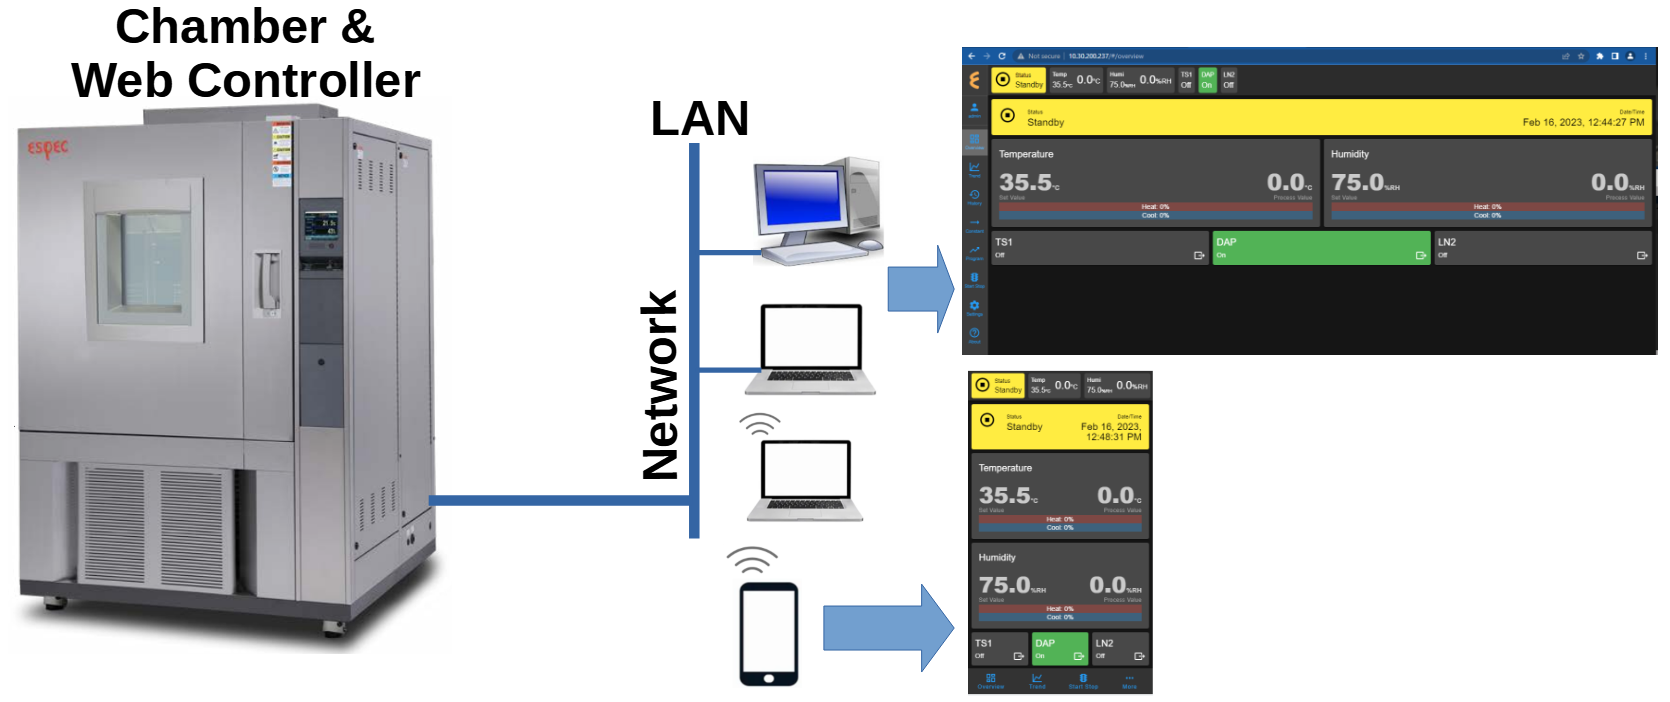 Network connection on a DHCP setup